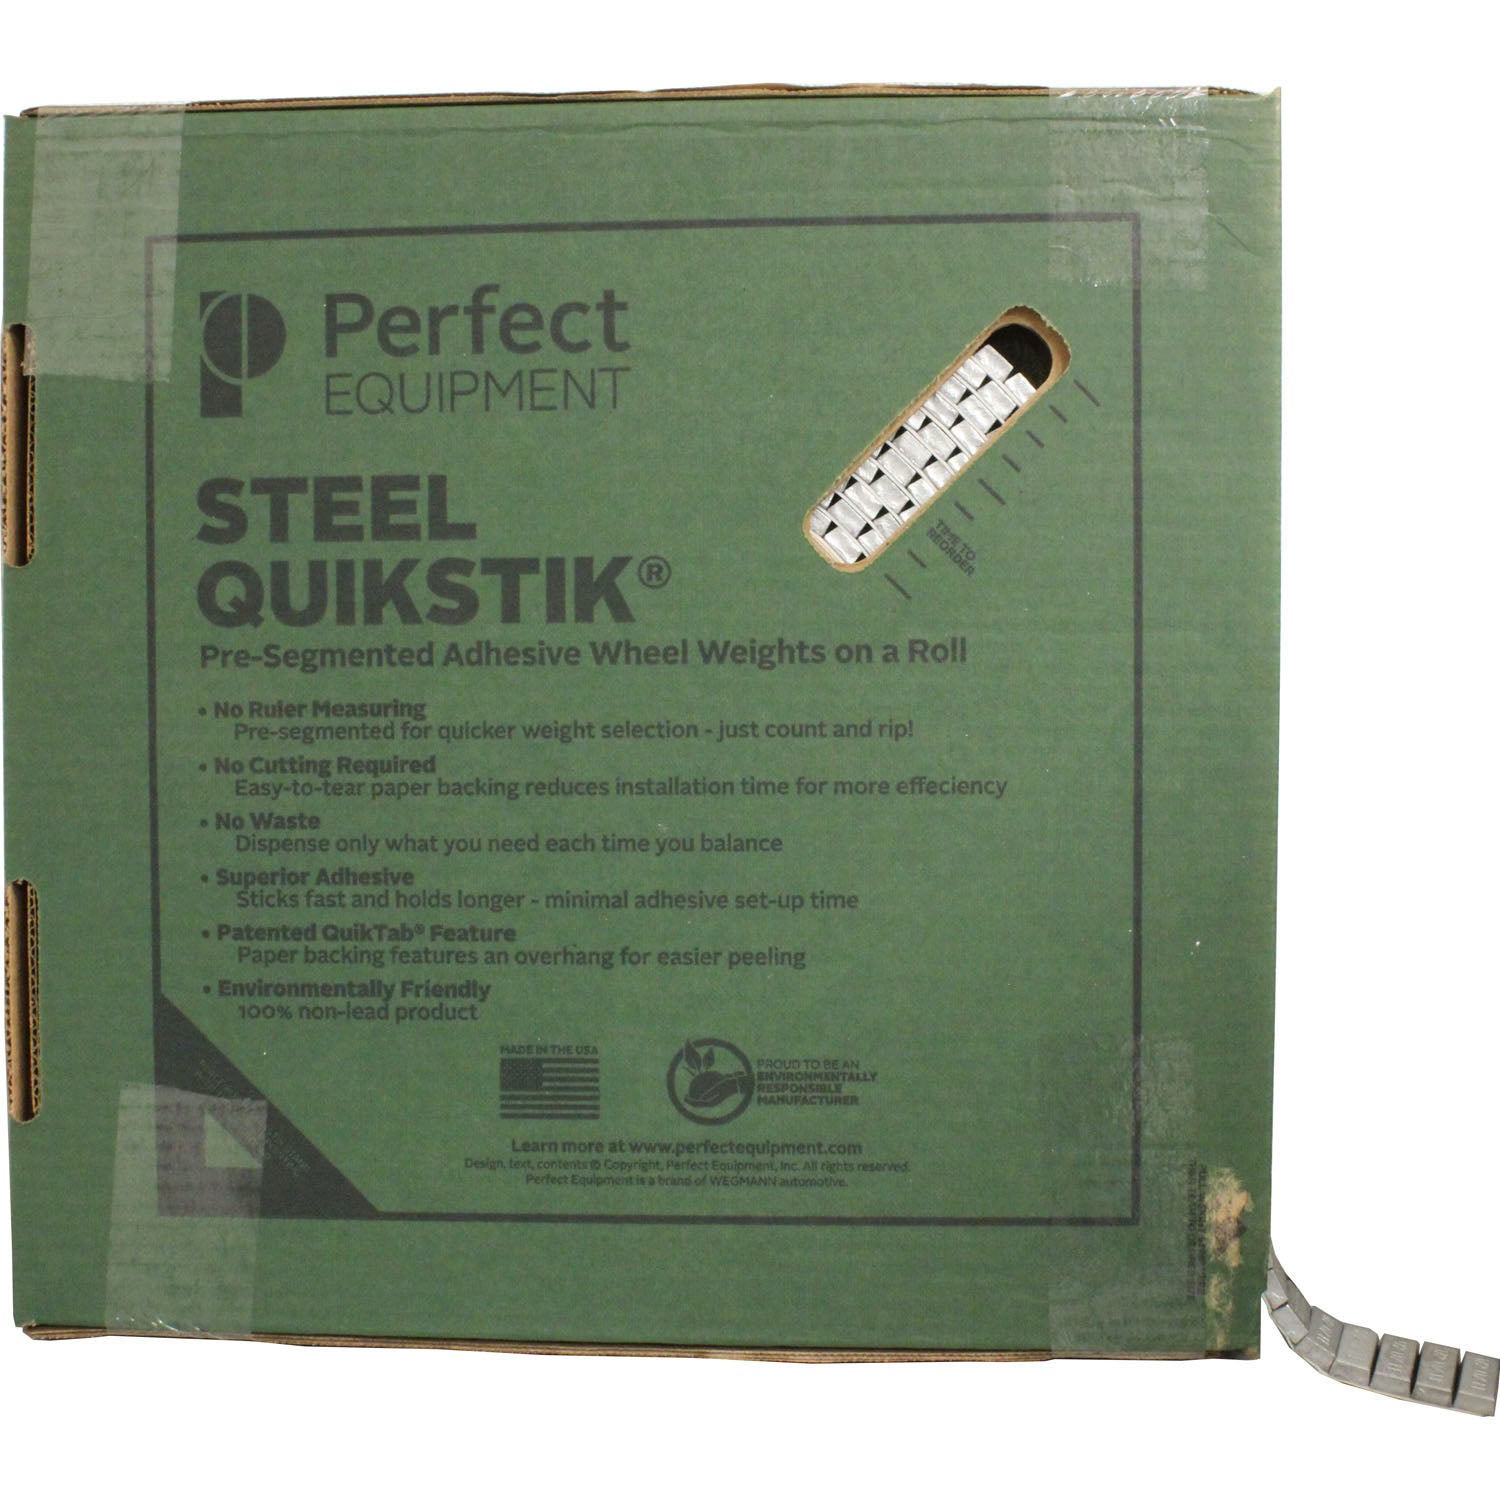 Perfect Equipment 300360STR Steel Adhesive Wheel Weight 0.50 oz. 1" - 640 Pieces